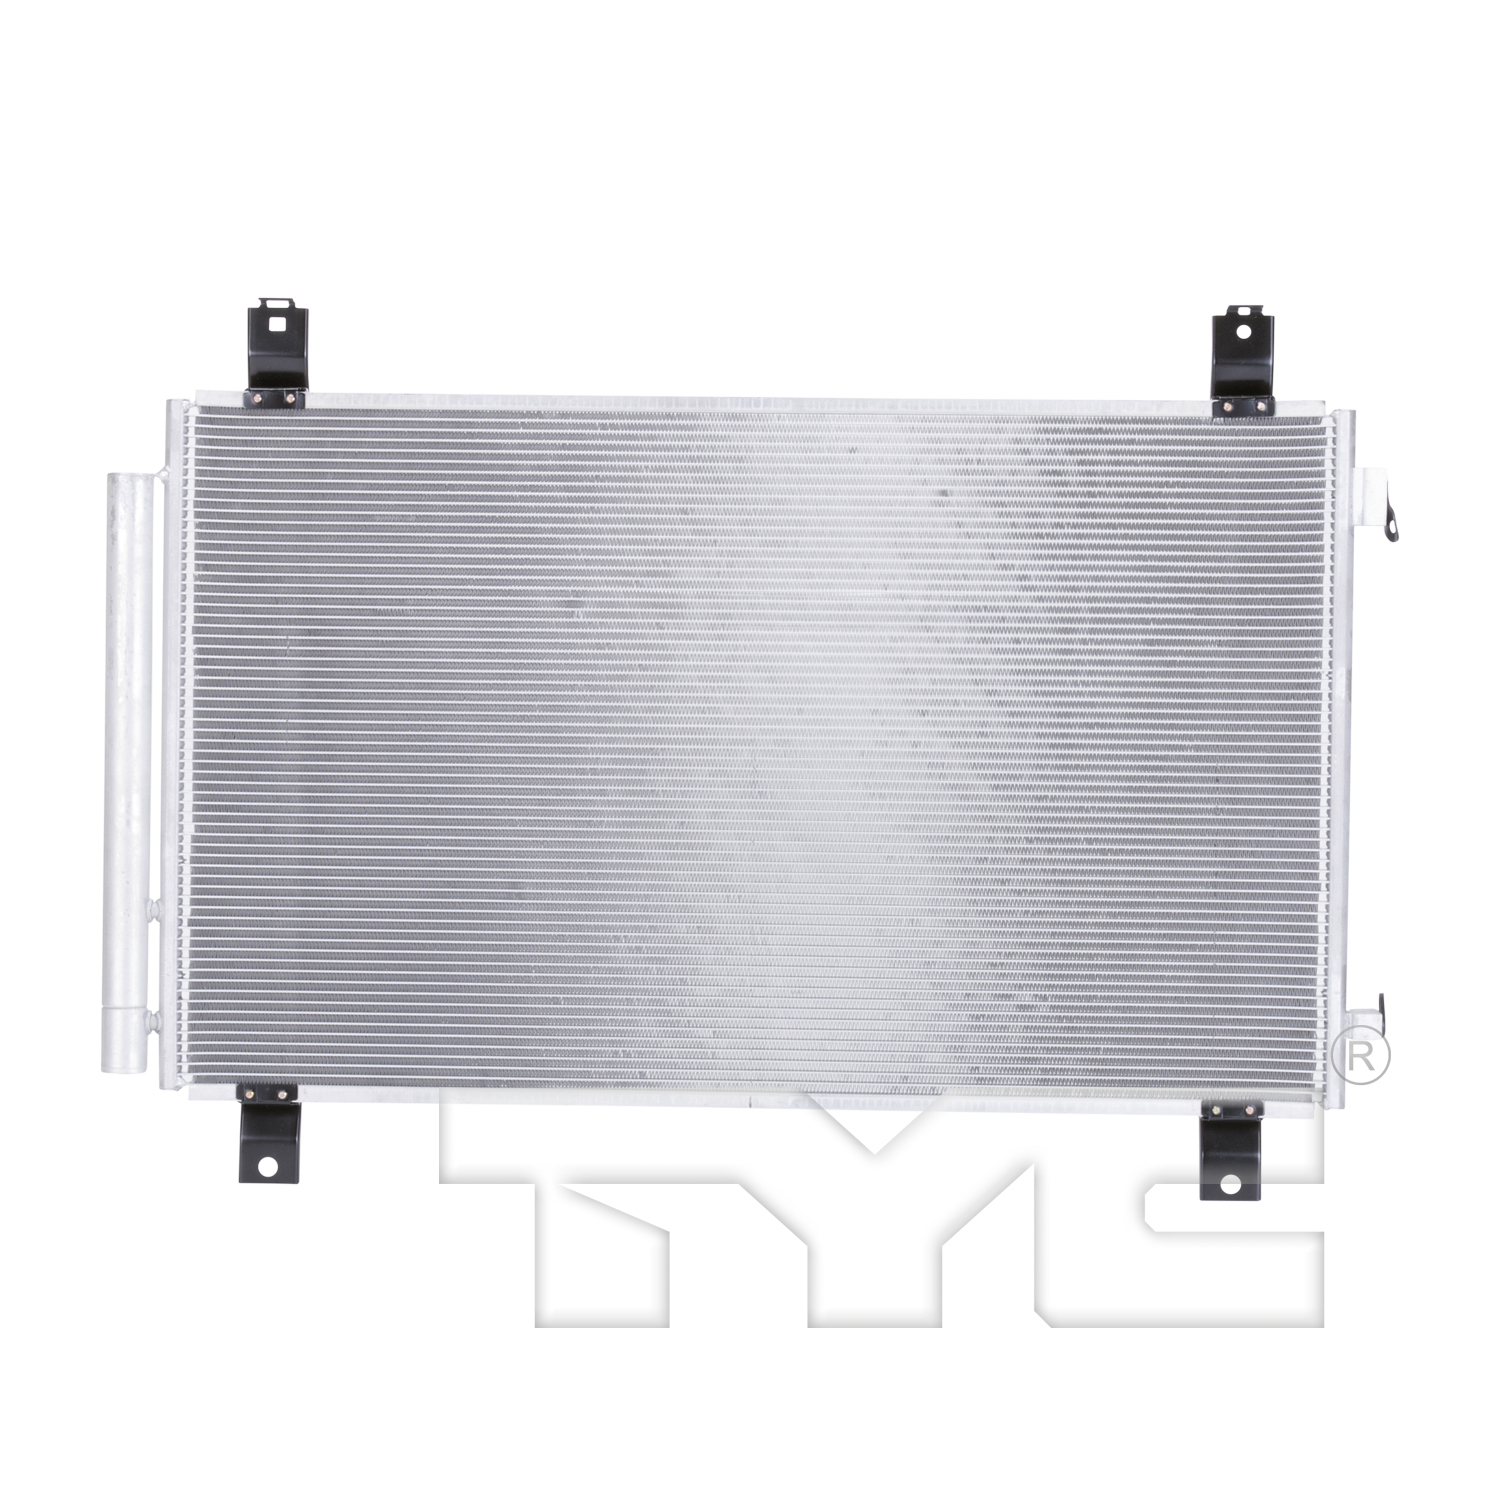 Aftermarket AC CONDENSERS for HONDA - PILOT, PILOT,16-22,Air conditioning condenser